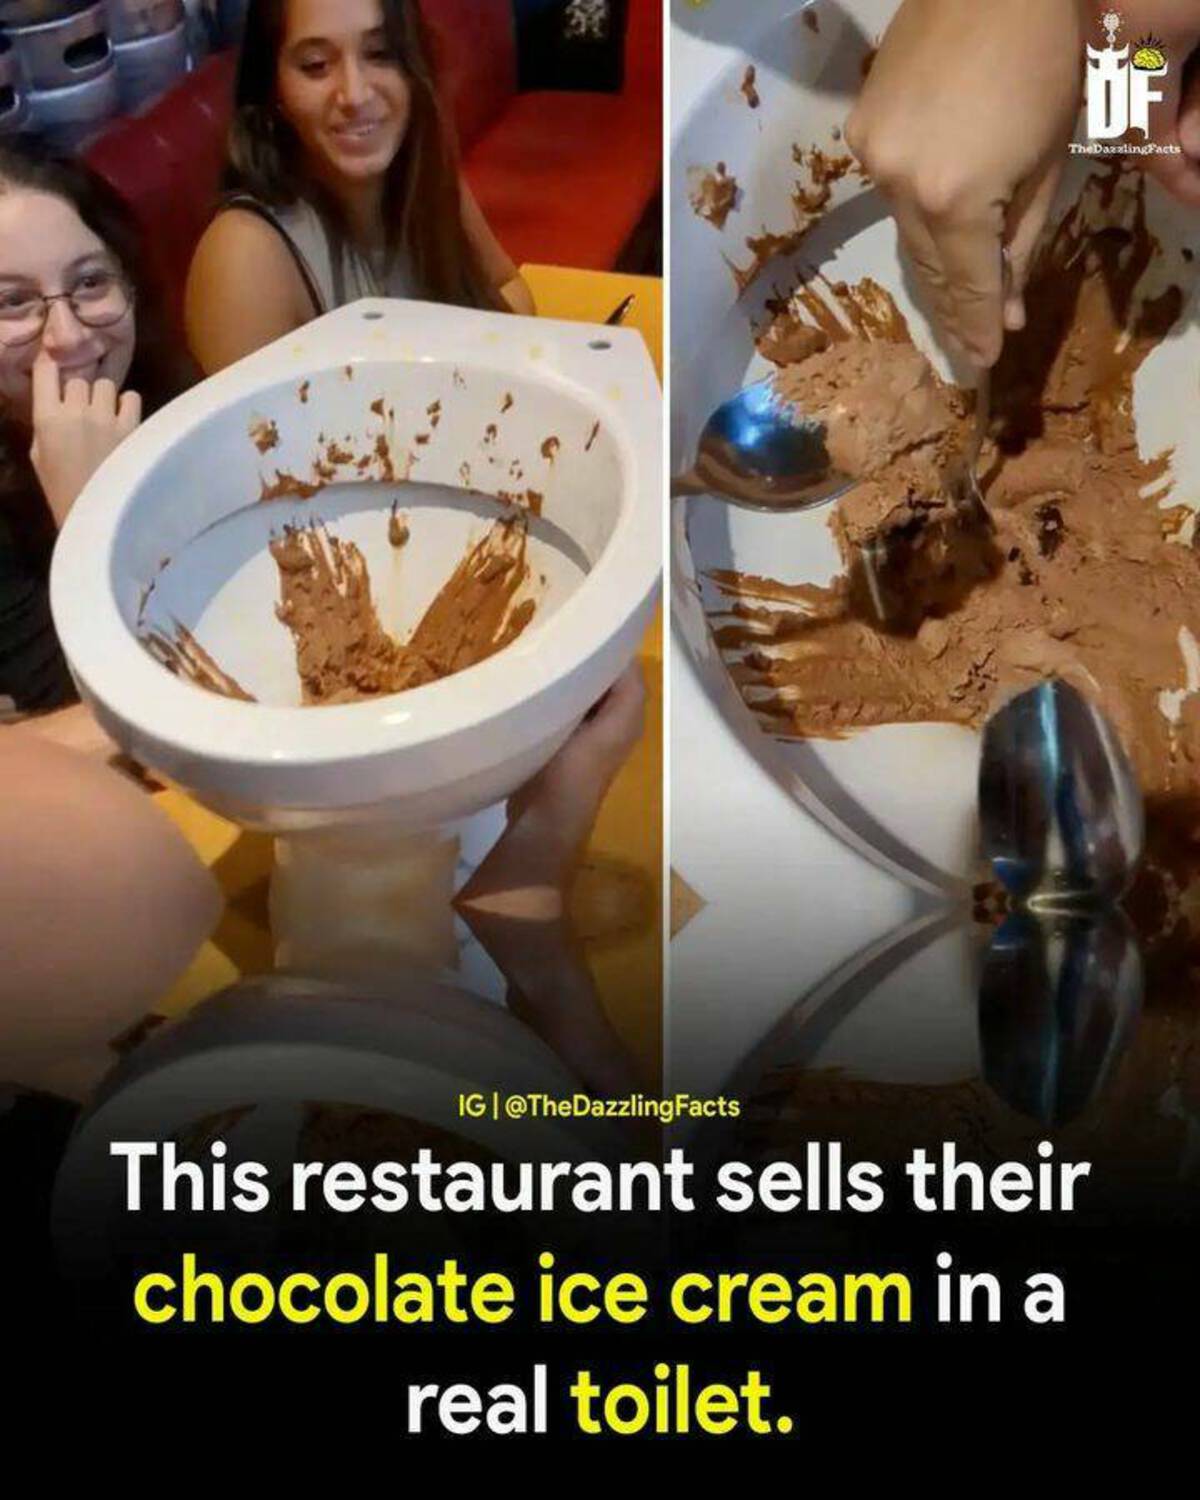 ice cream in toilet bowl - Of The DazzlingFacts Ig Facts This restaurant sells their chocolate ice cream in a real toilet.